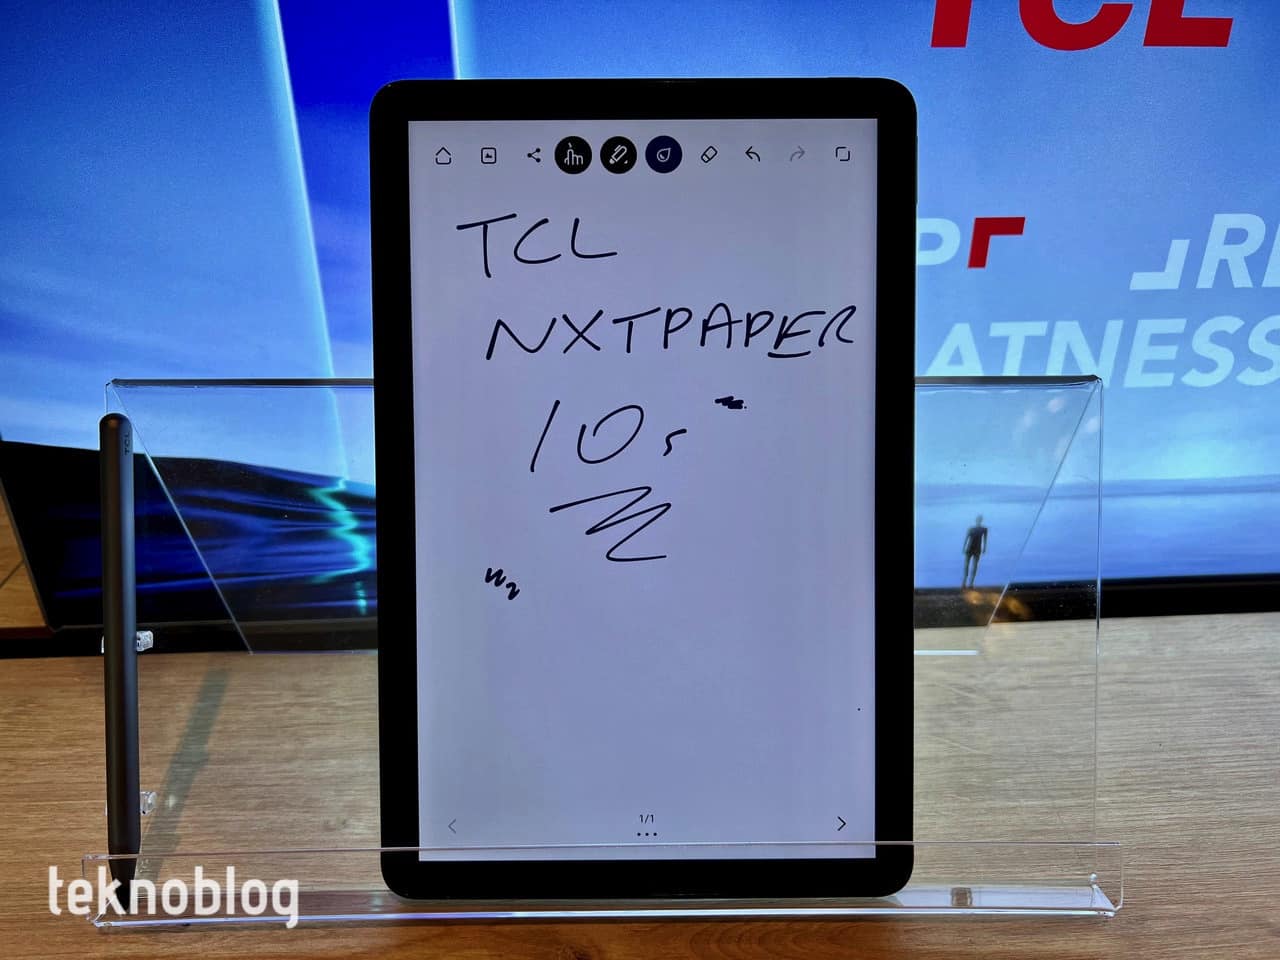 tcl nxtpaper 10s